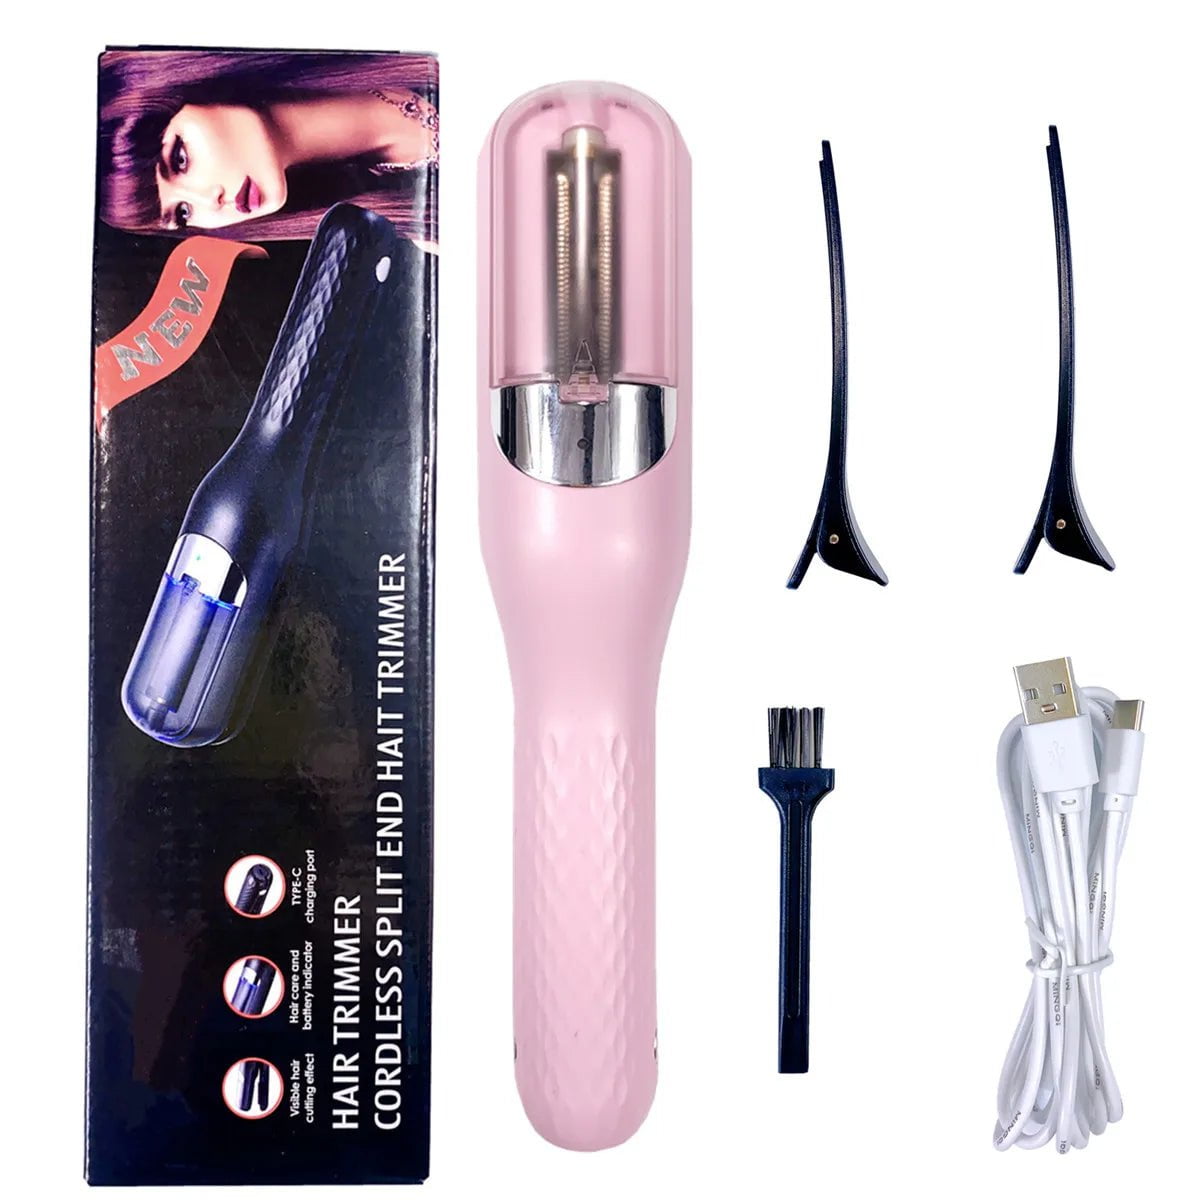 Split Hair Trimmer Hair Split Ends Trimmer Remover Damaged Hair Repair Hair Care Treatment Rechargeable Cordless Hair Cutting pink / United States